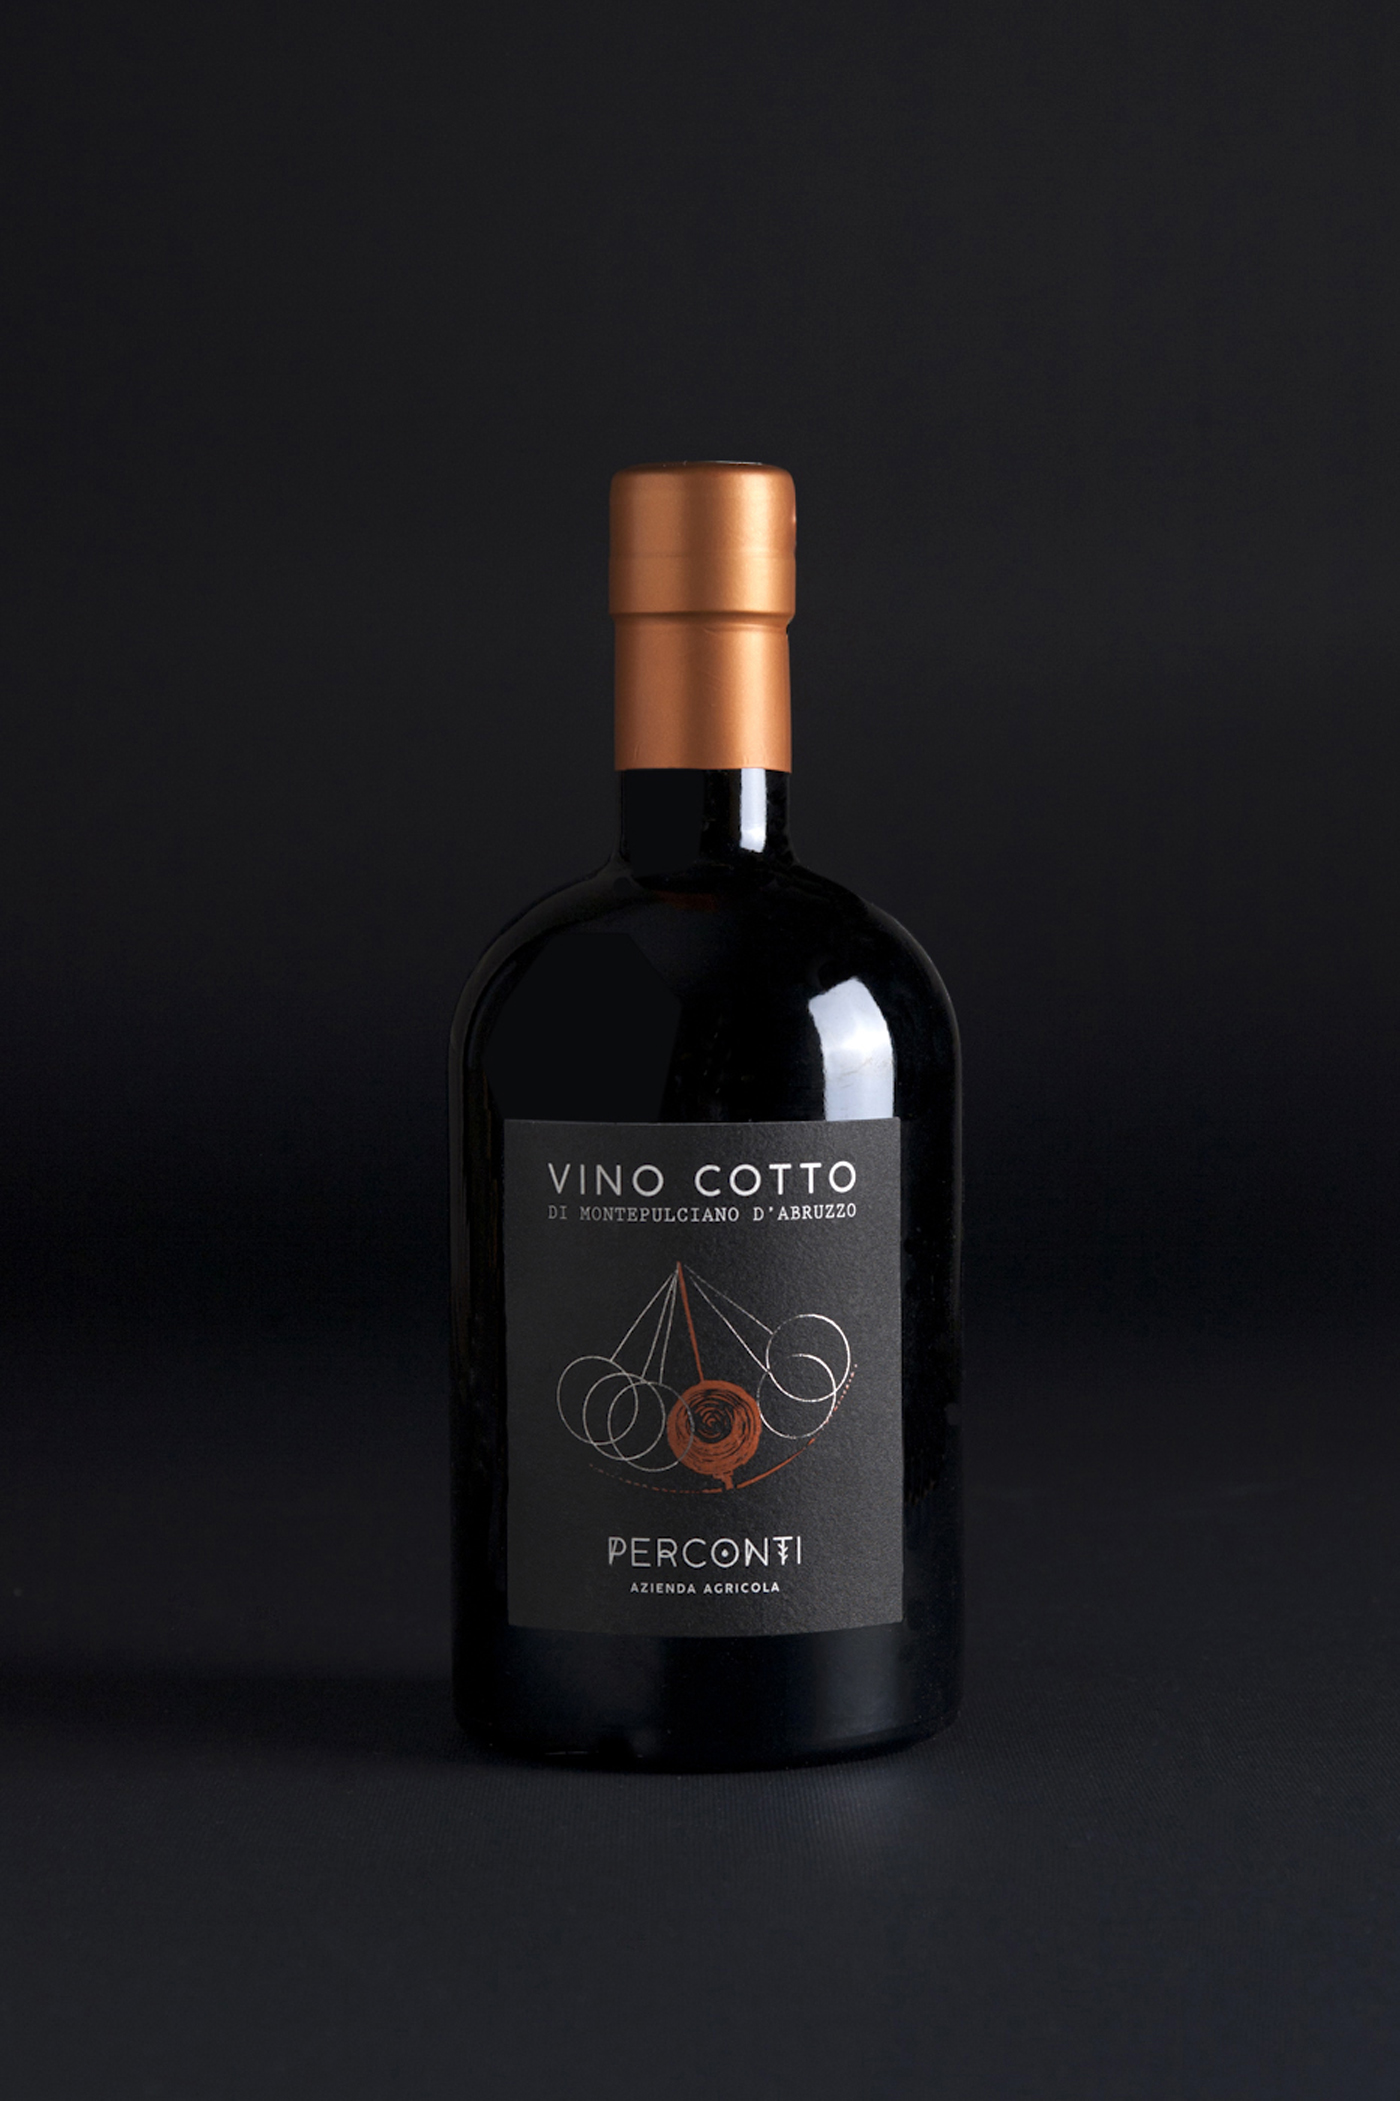 Perconti Dessert Wine Packaging Inspired by the Concept of Time